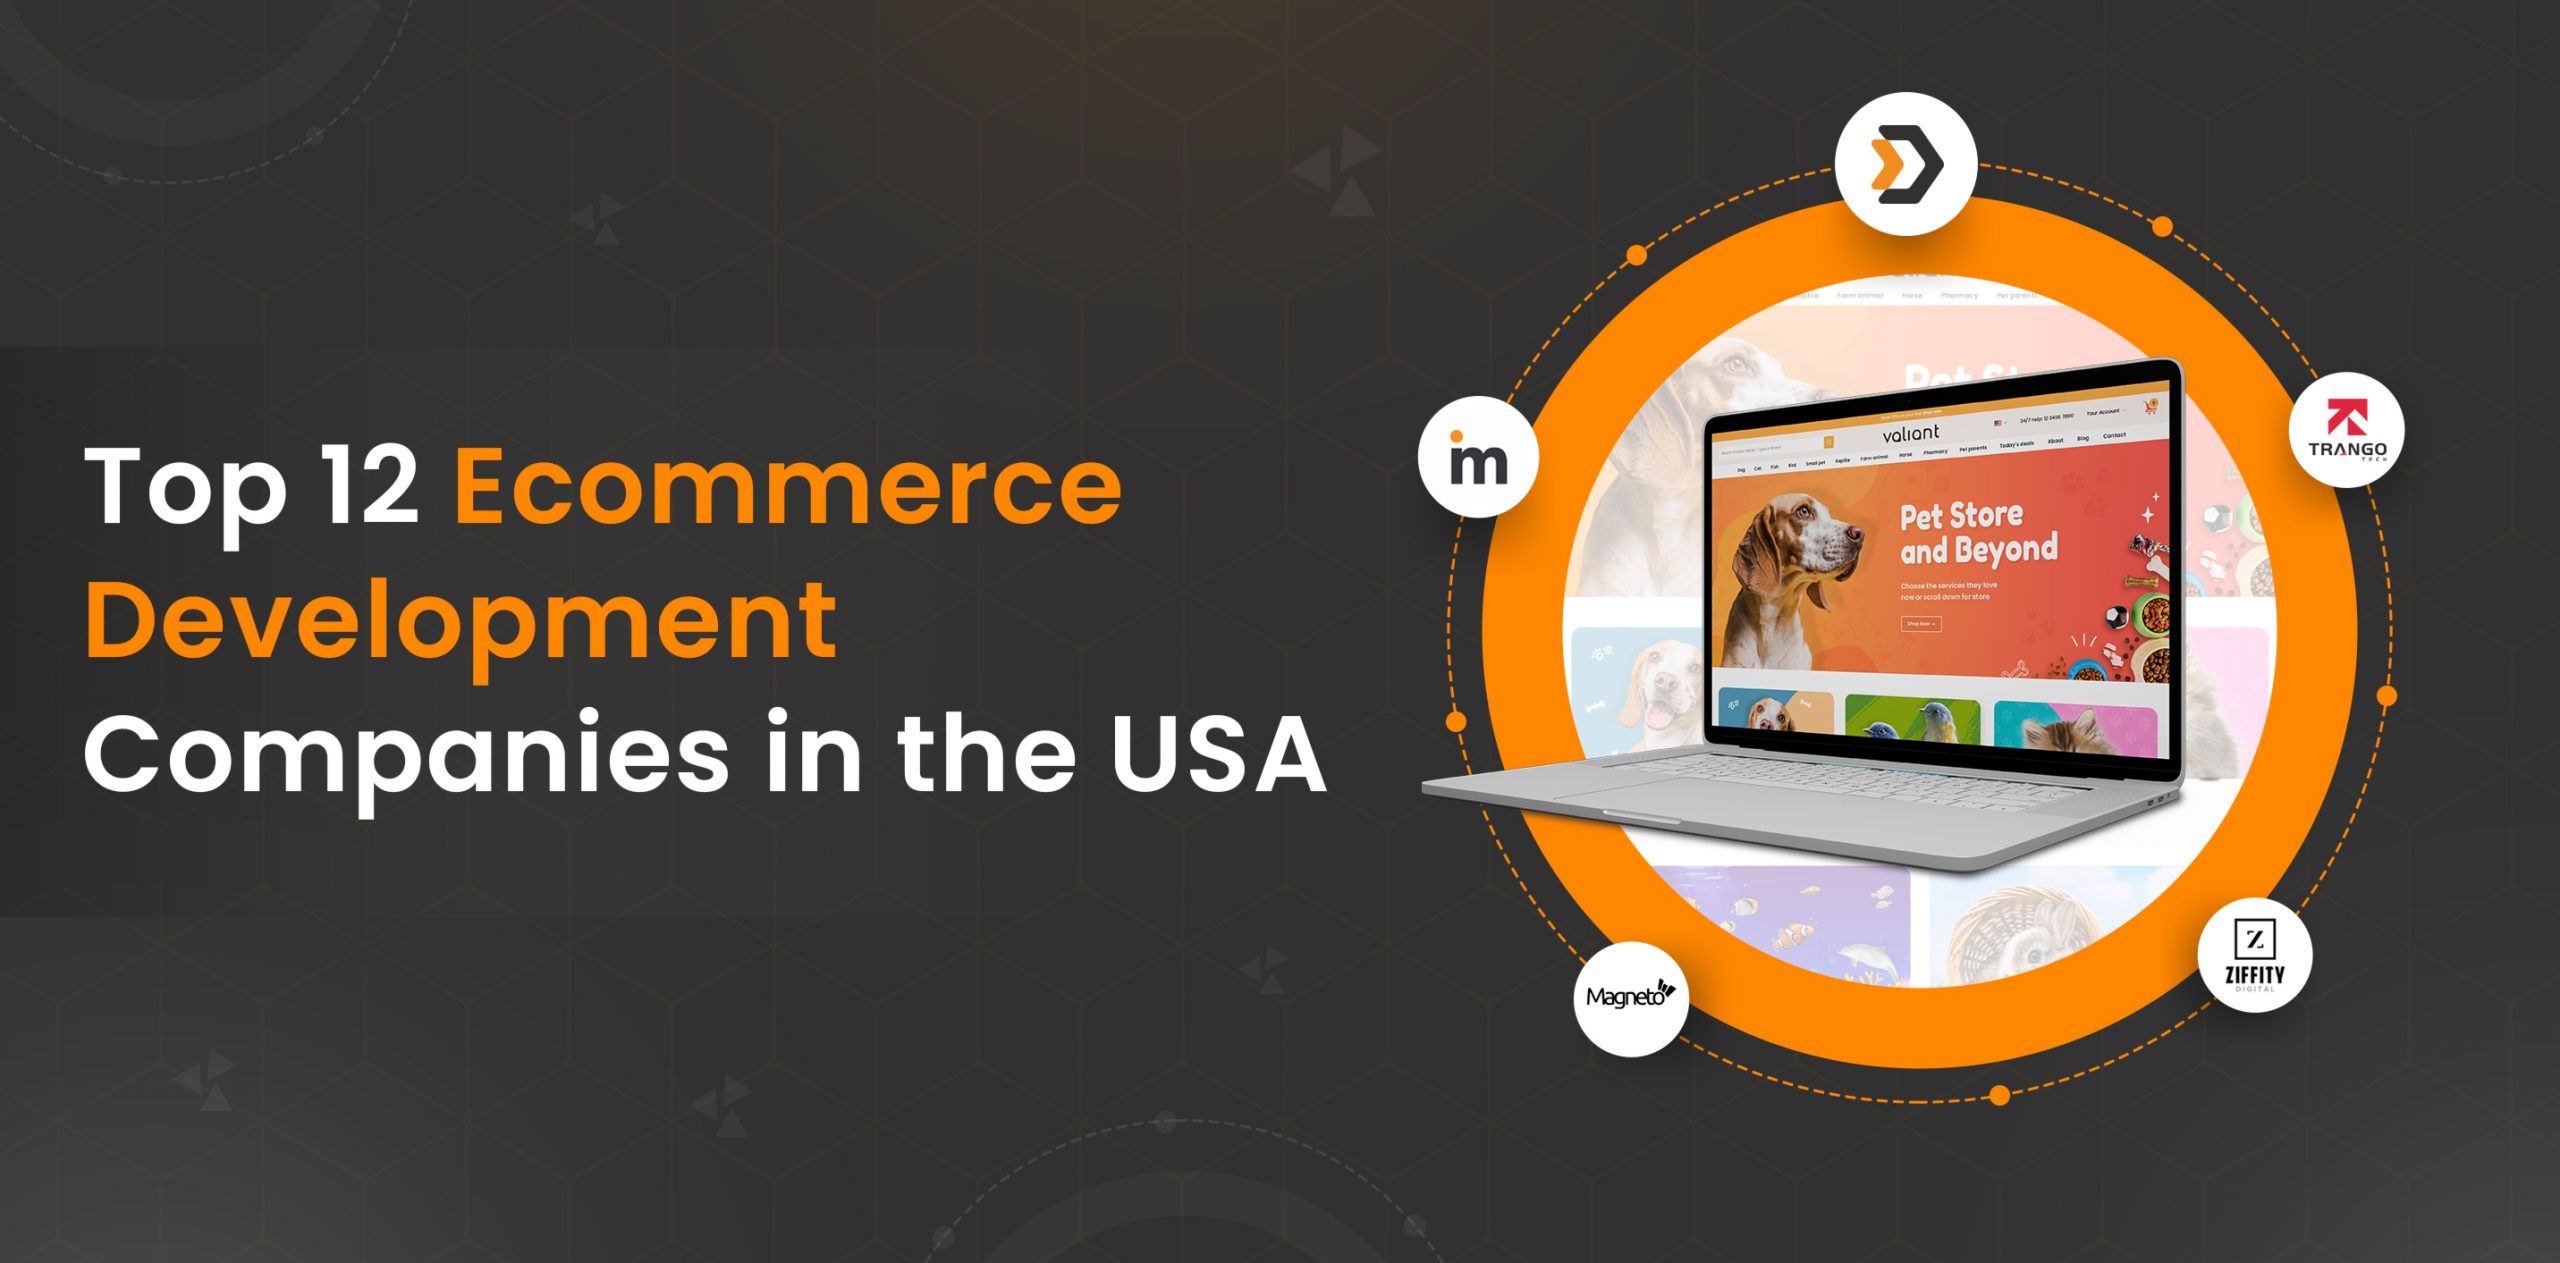 Top 12 Ecommerce Development Companies in the USA